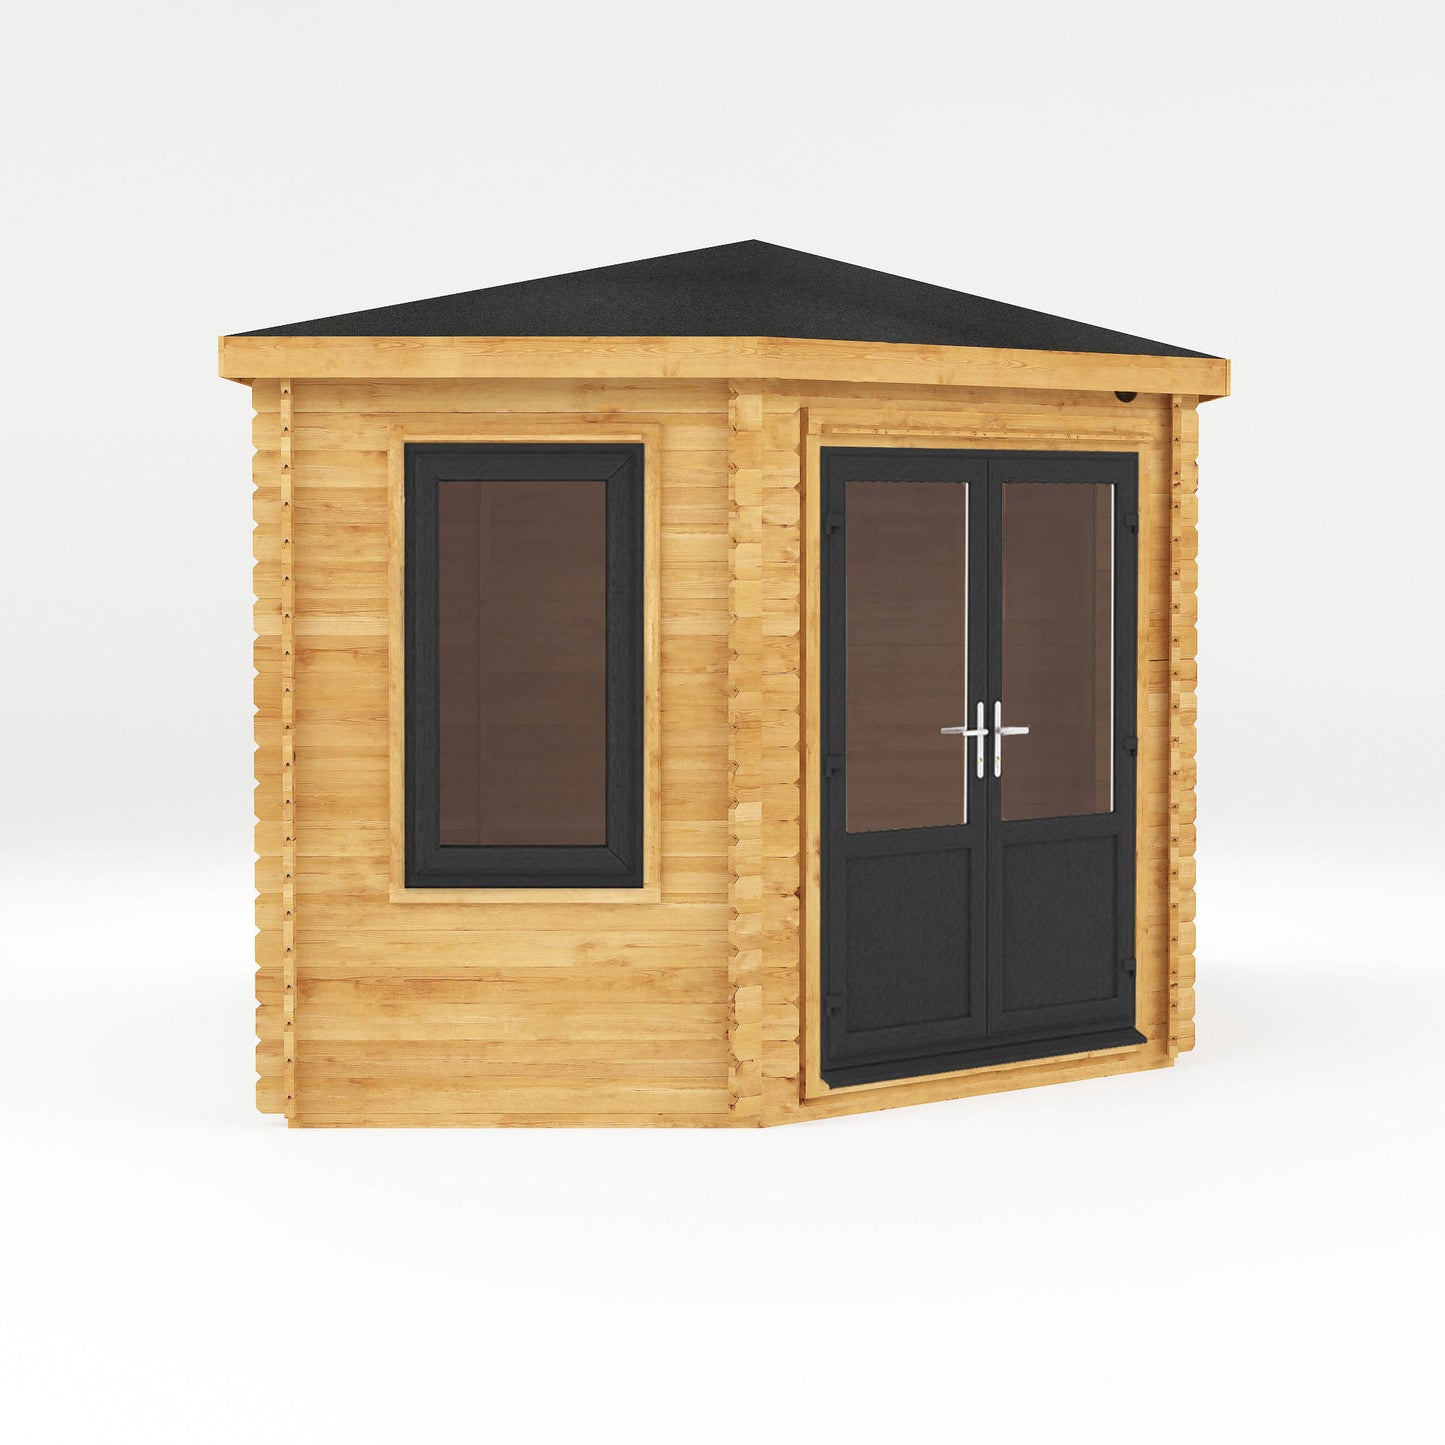 The Goldcrest 5m x 3m Log Cabin with Anthracite UPVC